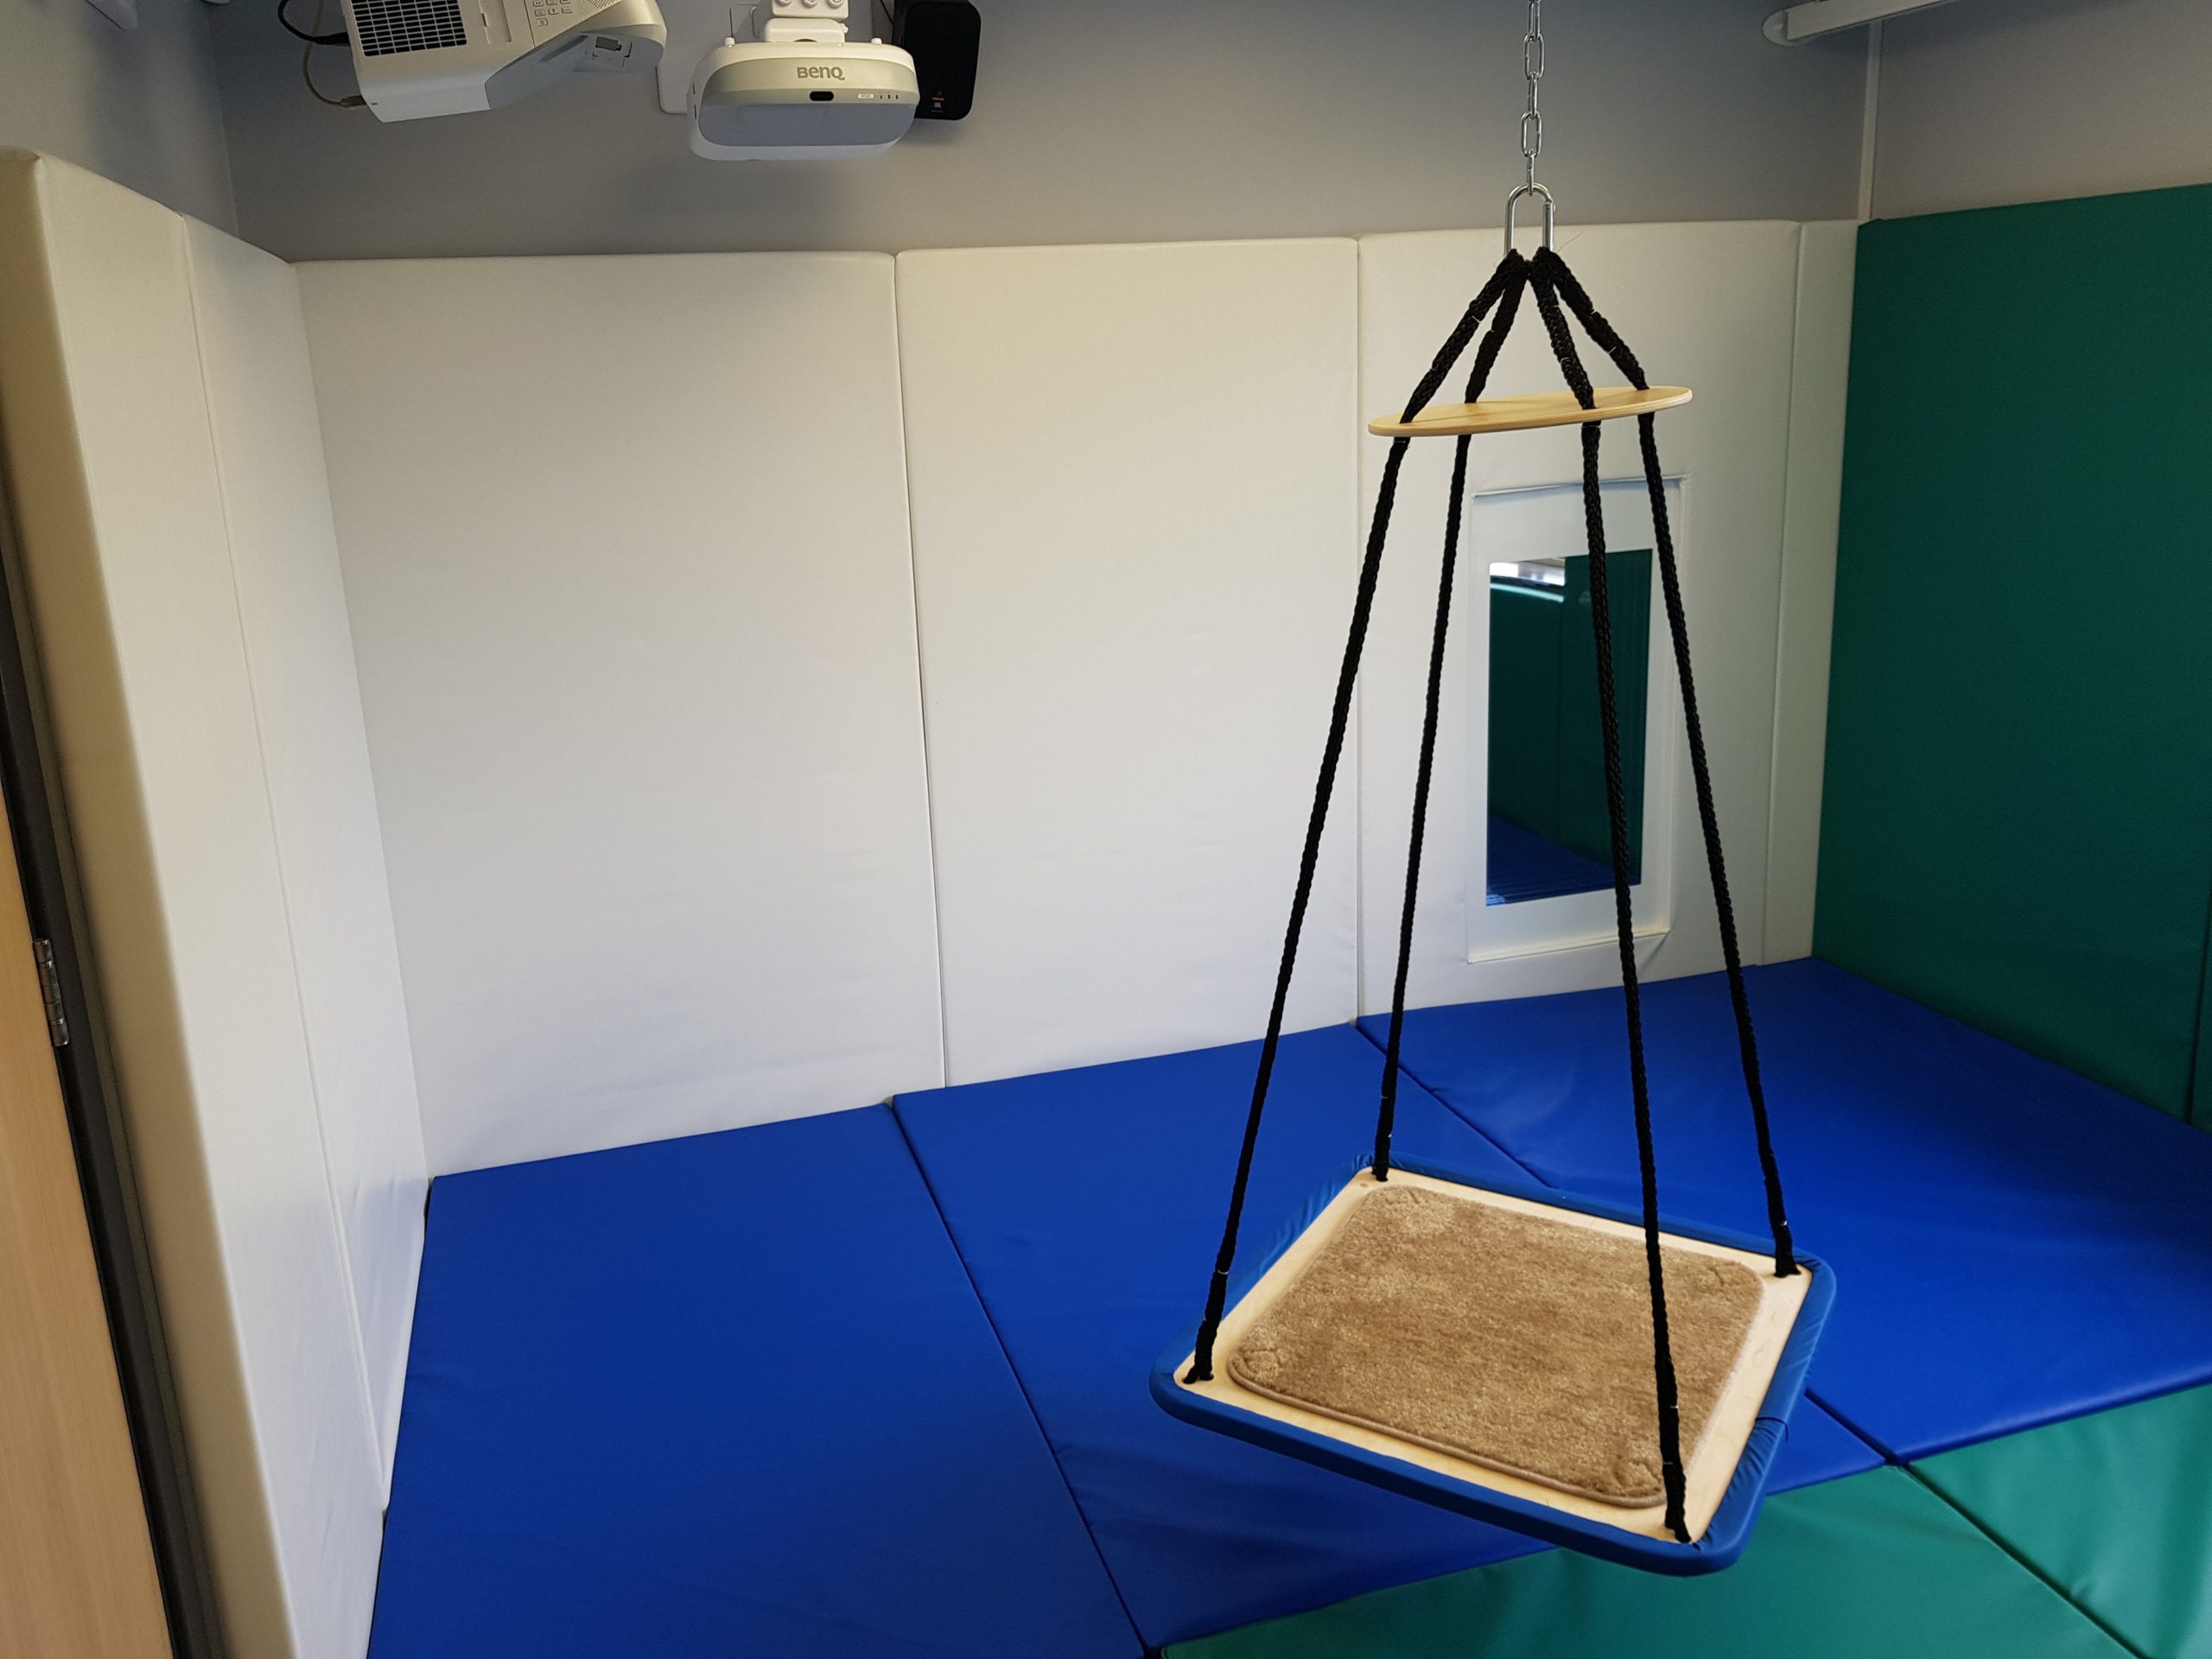 Sensory Integration Room complete with bubble wall and ceiling mounted swing